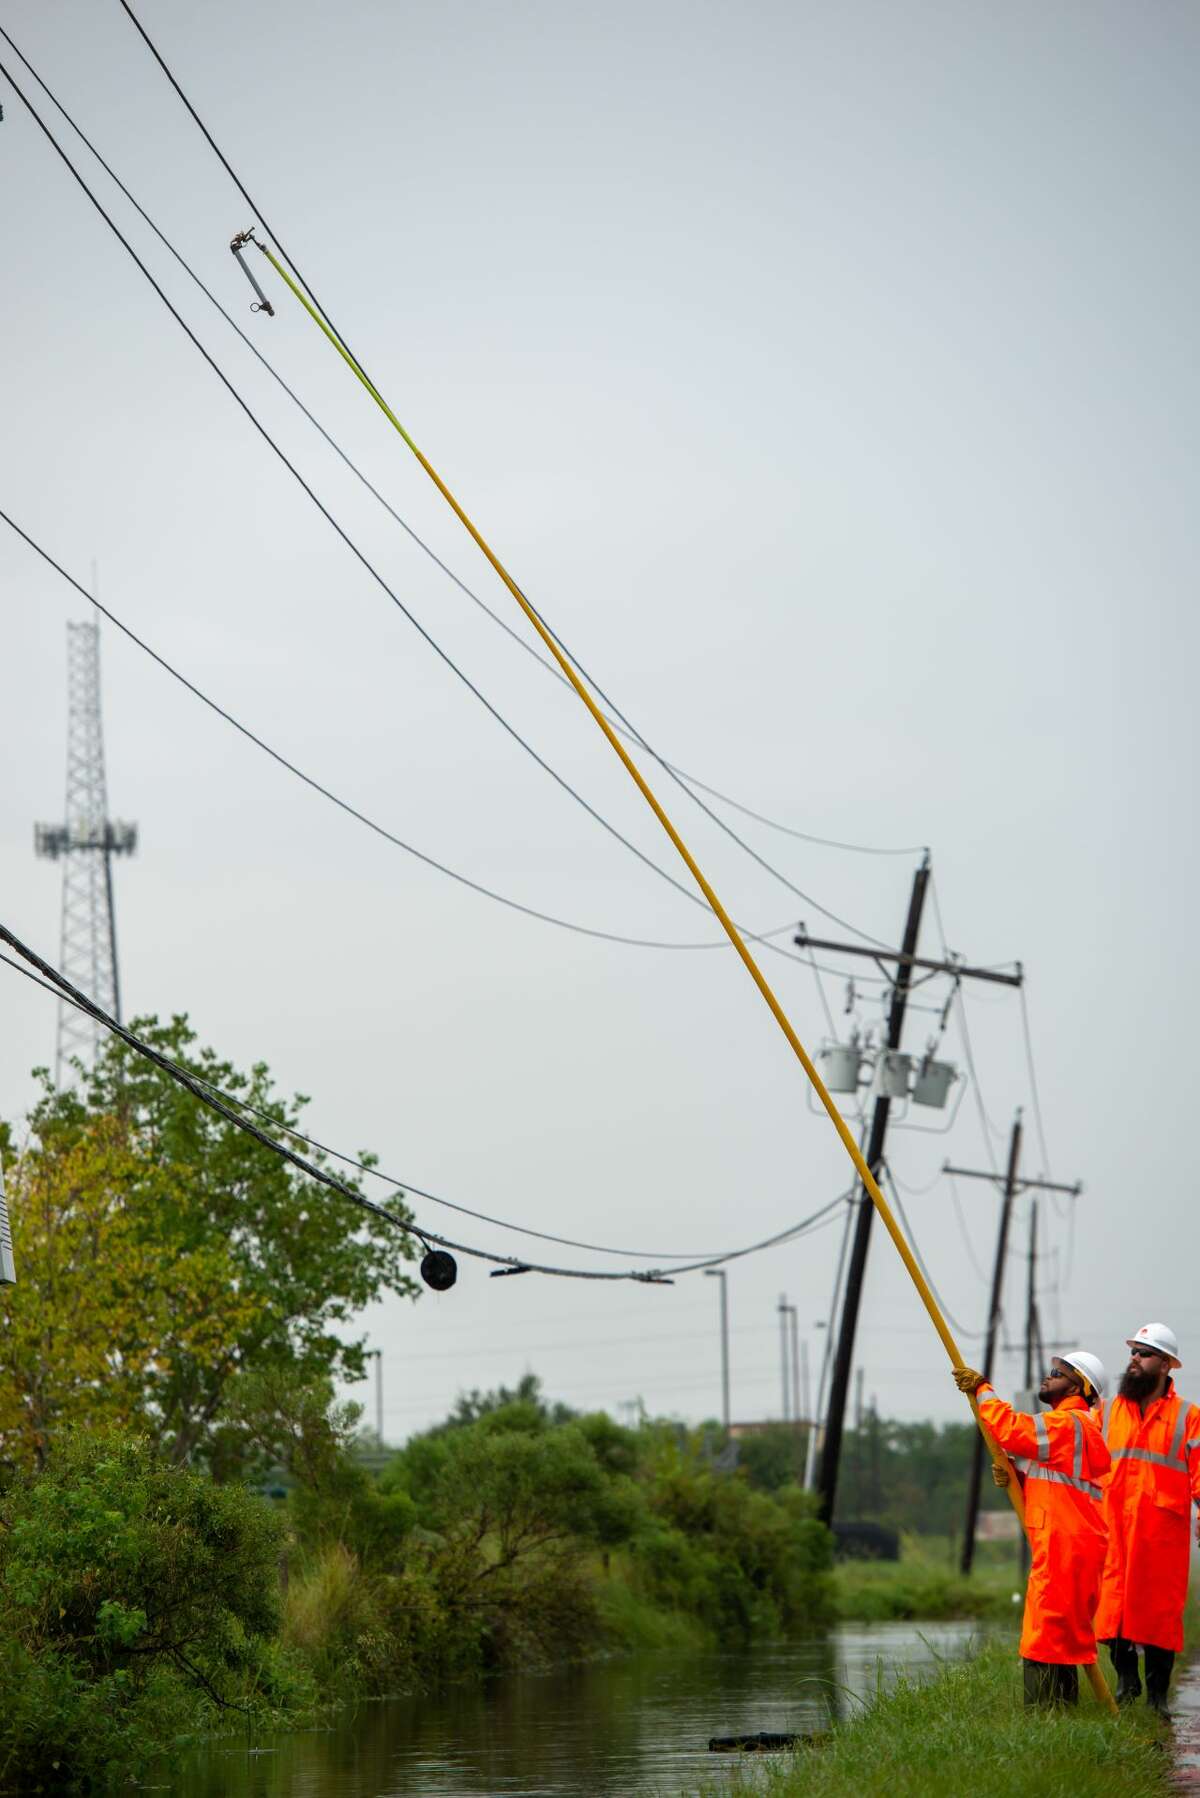 Entergy crews restore power after Tropical Storm Imelda. Photo provided by Entergy Texas